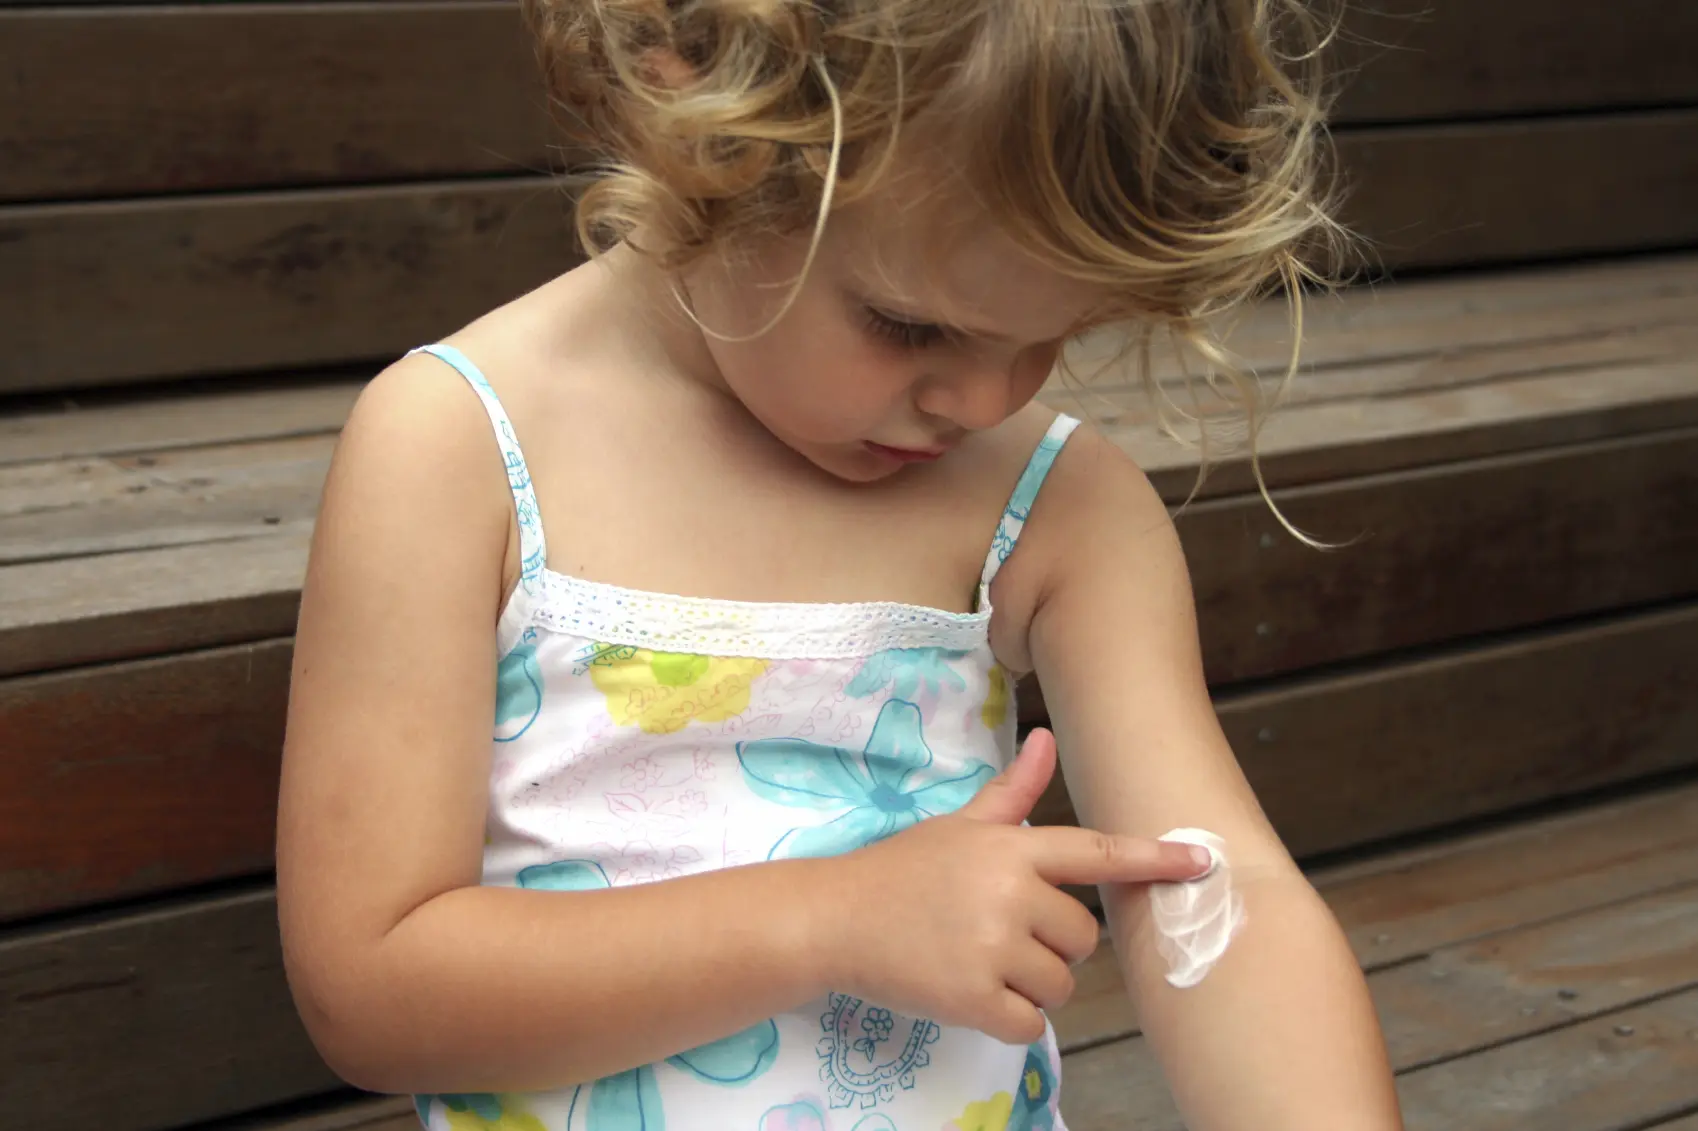 Young girl touching a band aid on her arm